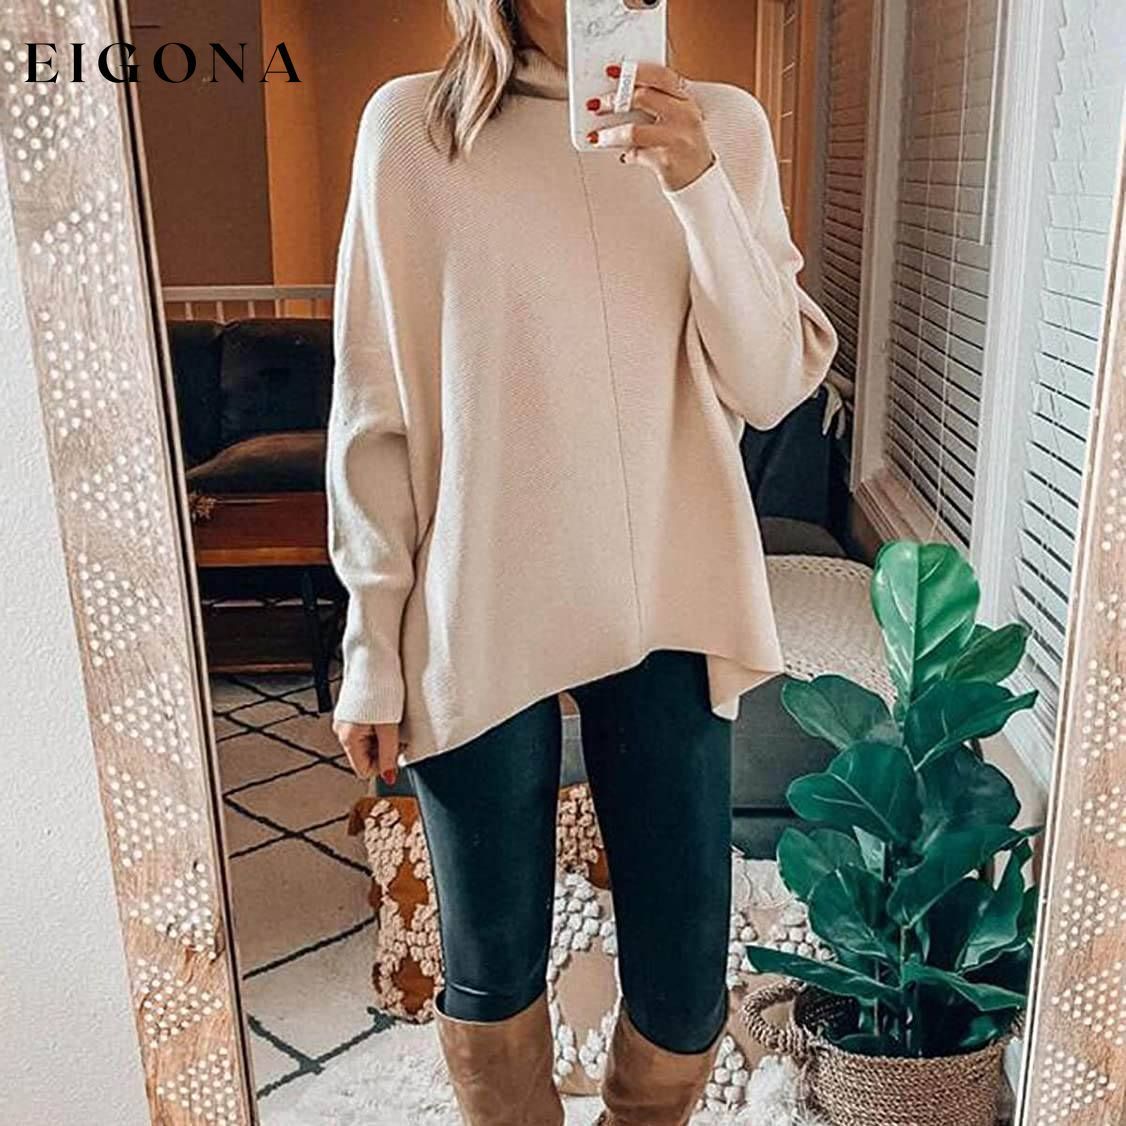 Women's High Neck Long Sweater __stock:500 clothes refund_fee:1200 tops